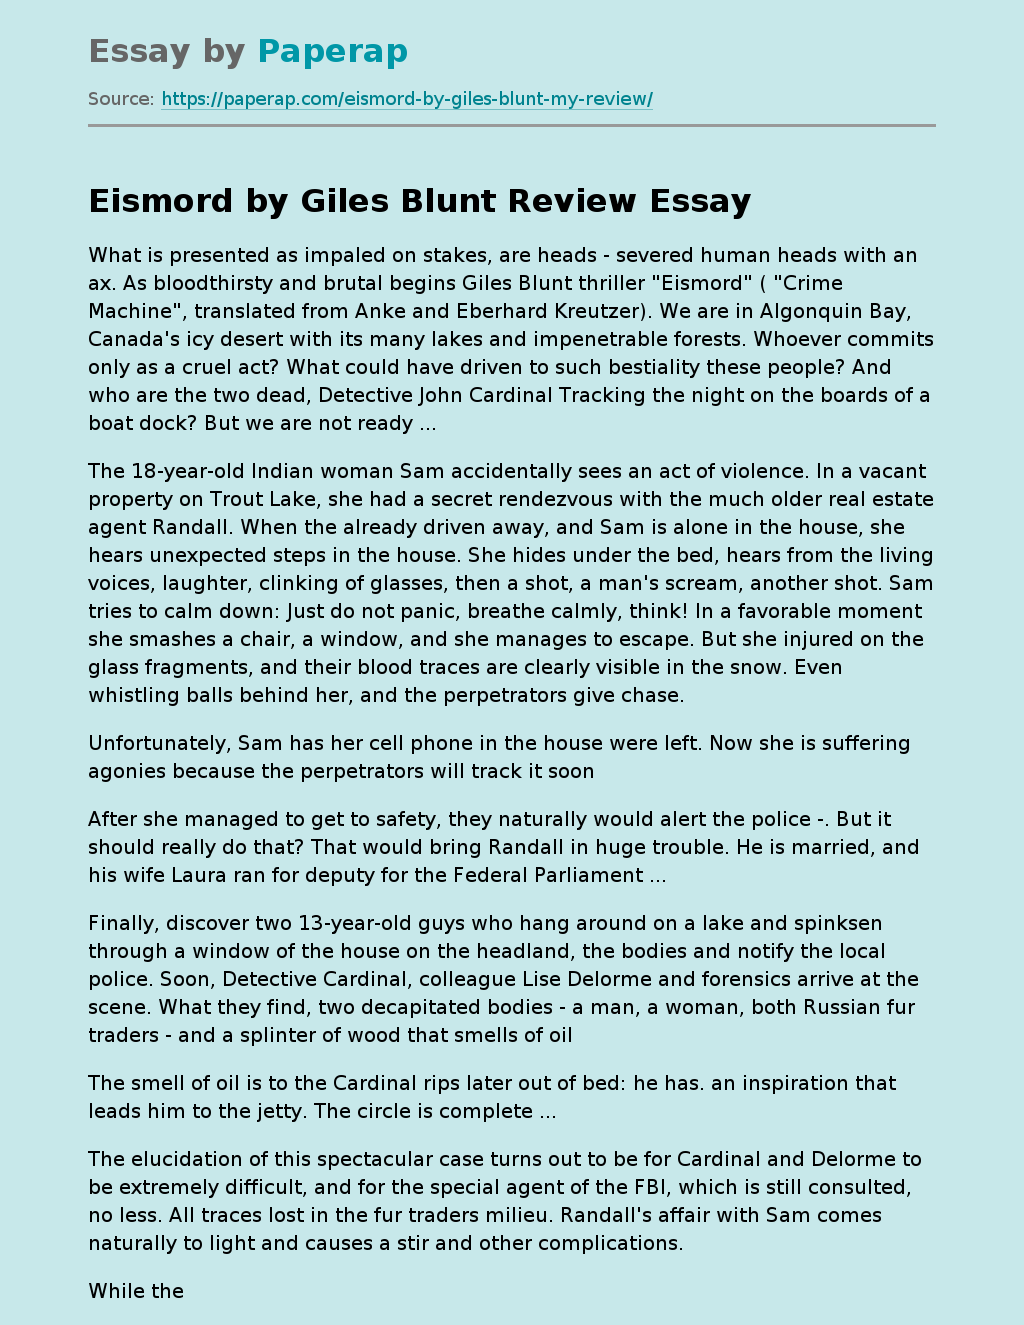 Thriller "Eismord" by Giles Blunt